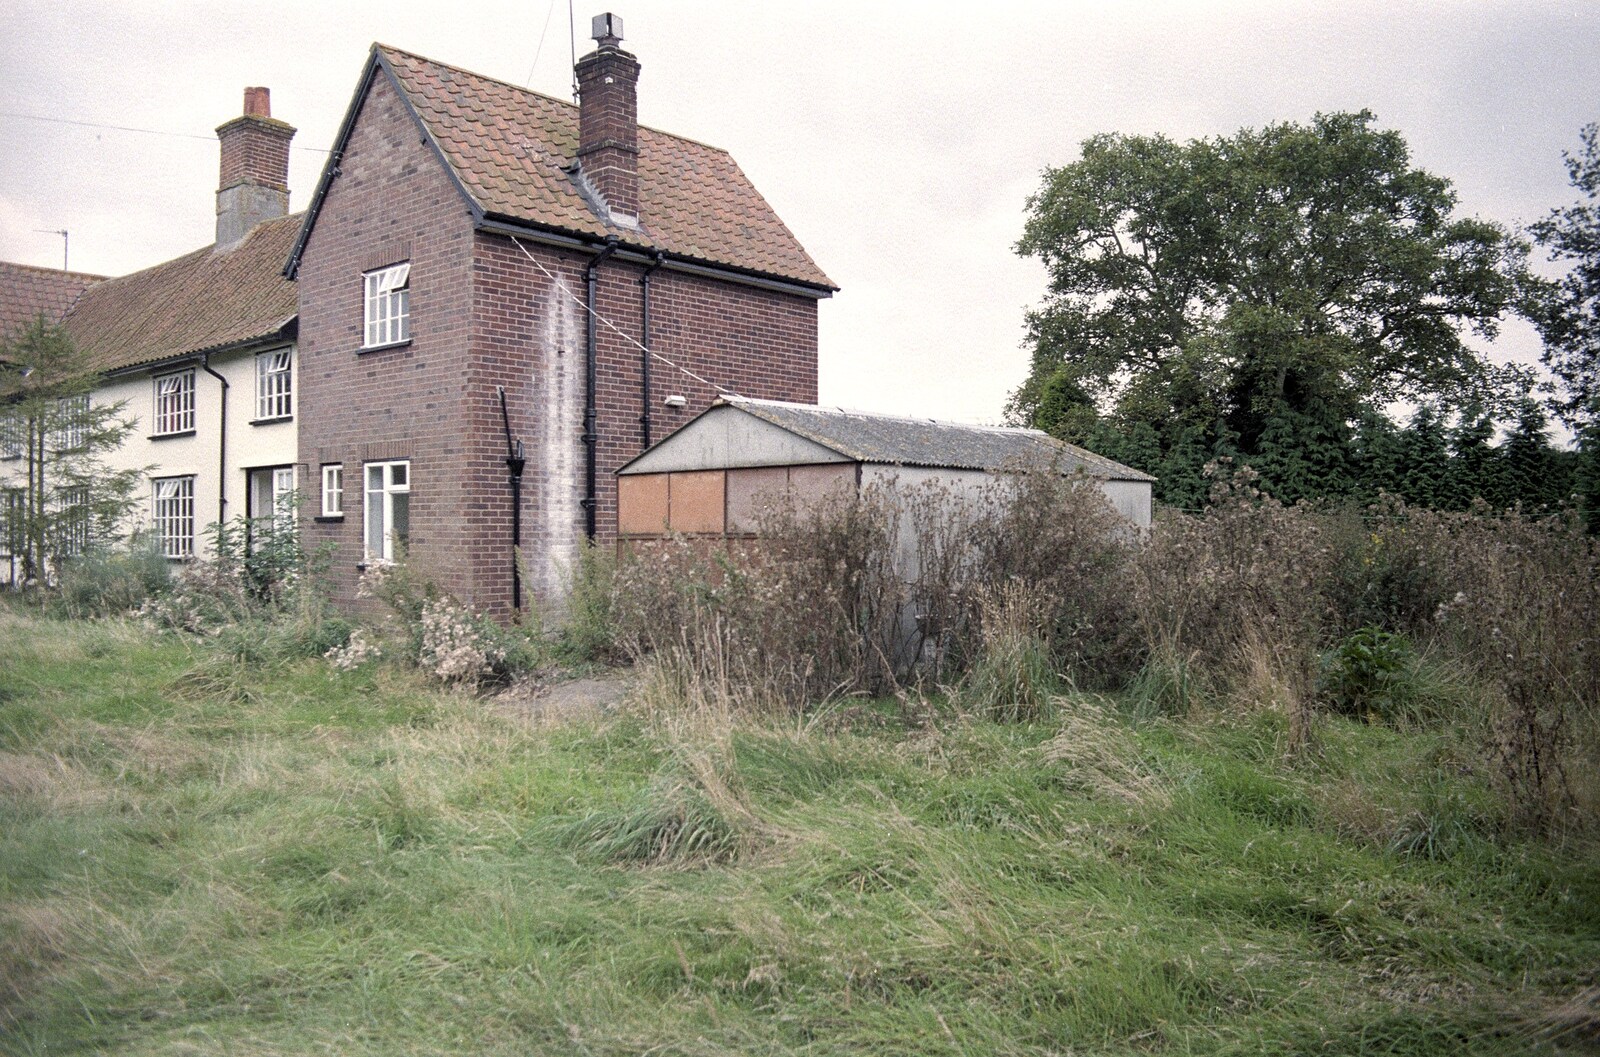 A view of the house and the old asbestos garage from Moving In, Brome, Suffolk - 10th April 1994